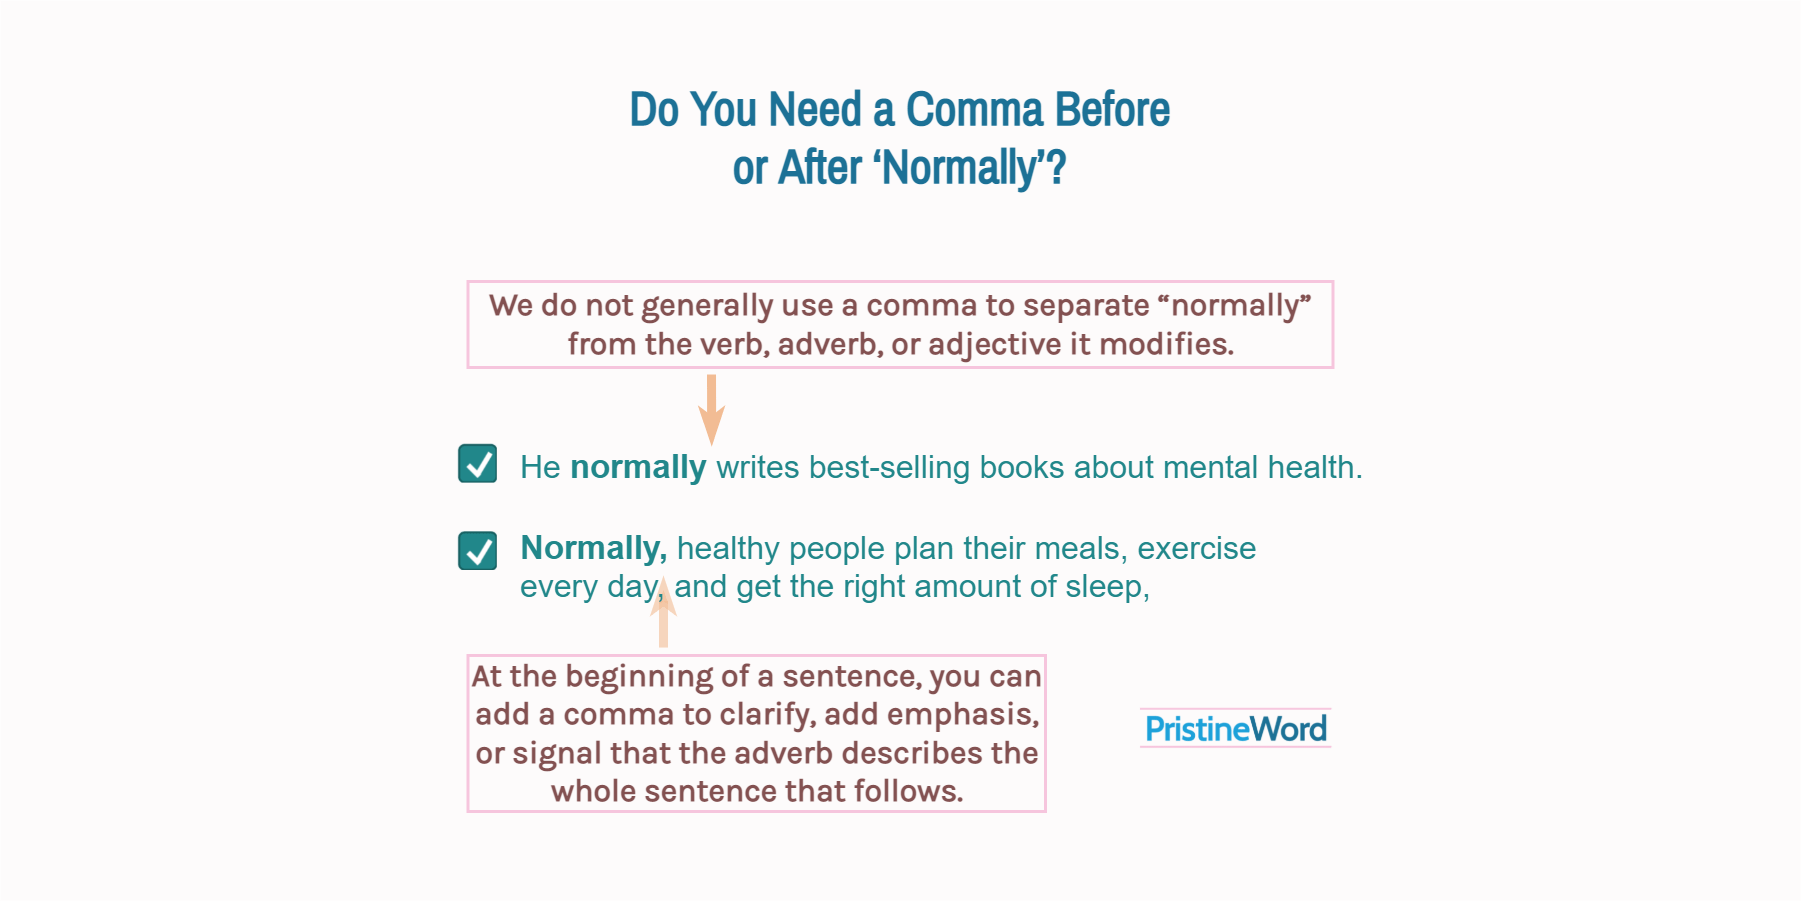 Do You Need a Comma Before or After 'Normally'?